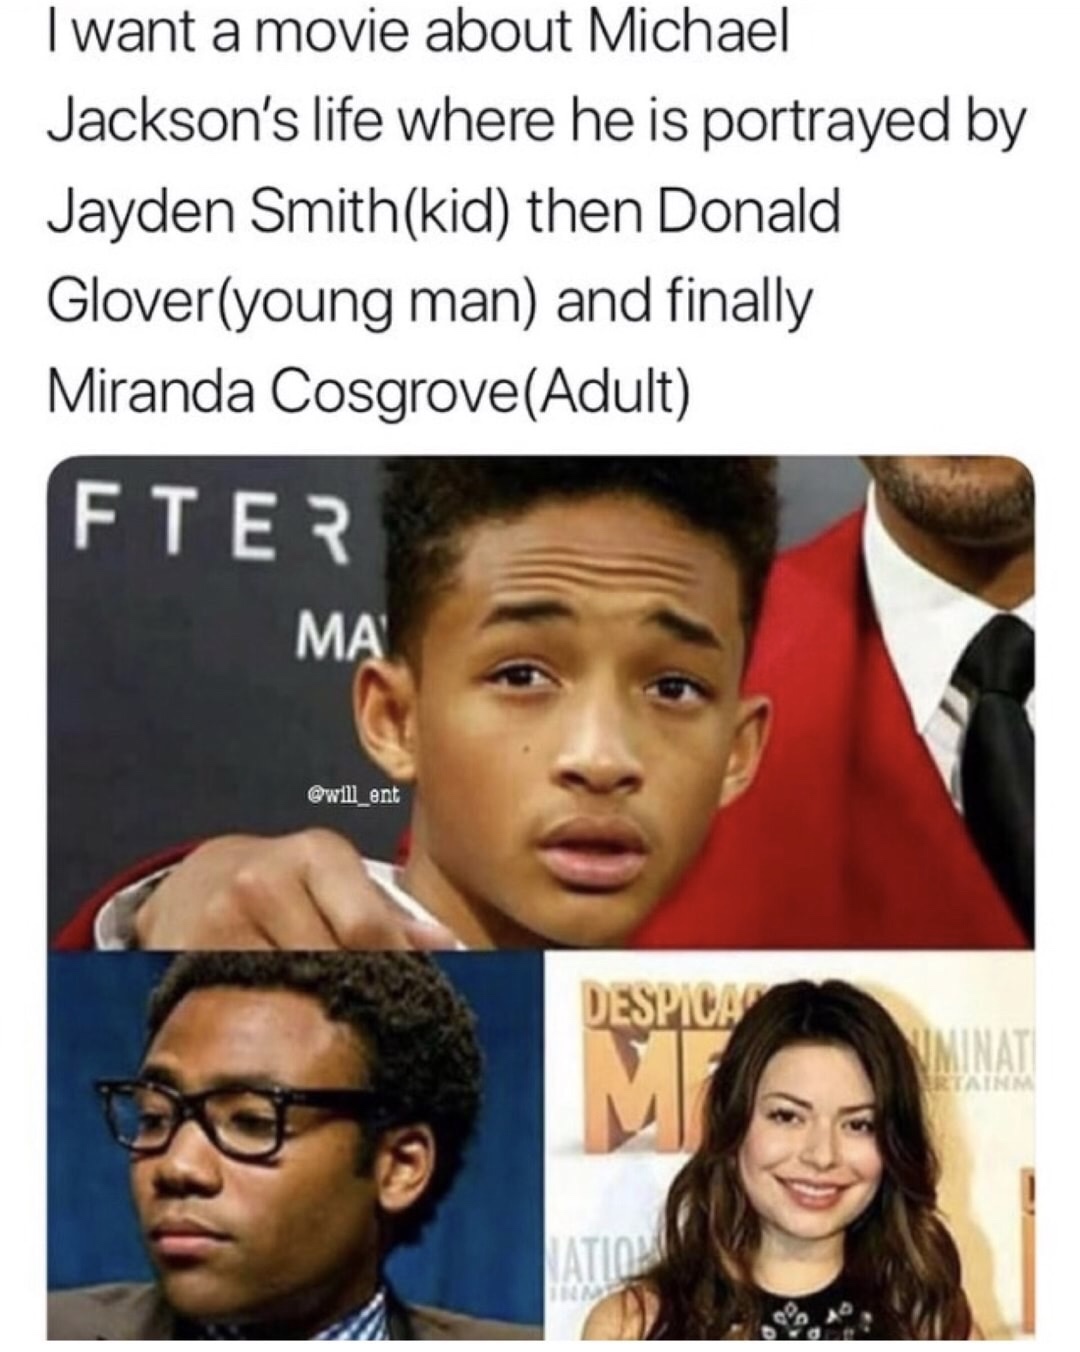 meme stream - miranda cosgrove michael jackson meme - I want a movie about Michael Jackson's life where he is portrayed by Jayden Smithkid then Donald Gloveryoung man and finally Miranda CosgroveAdult Fter Ma Despica Ation